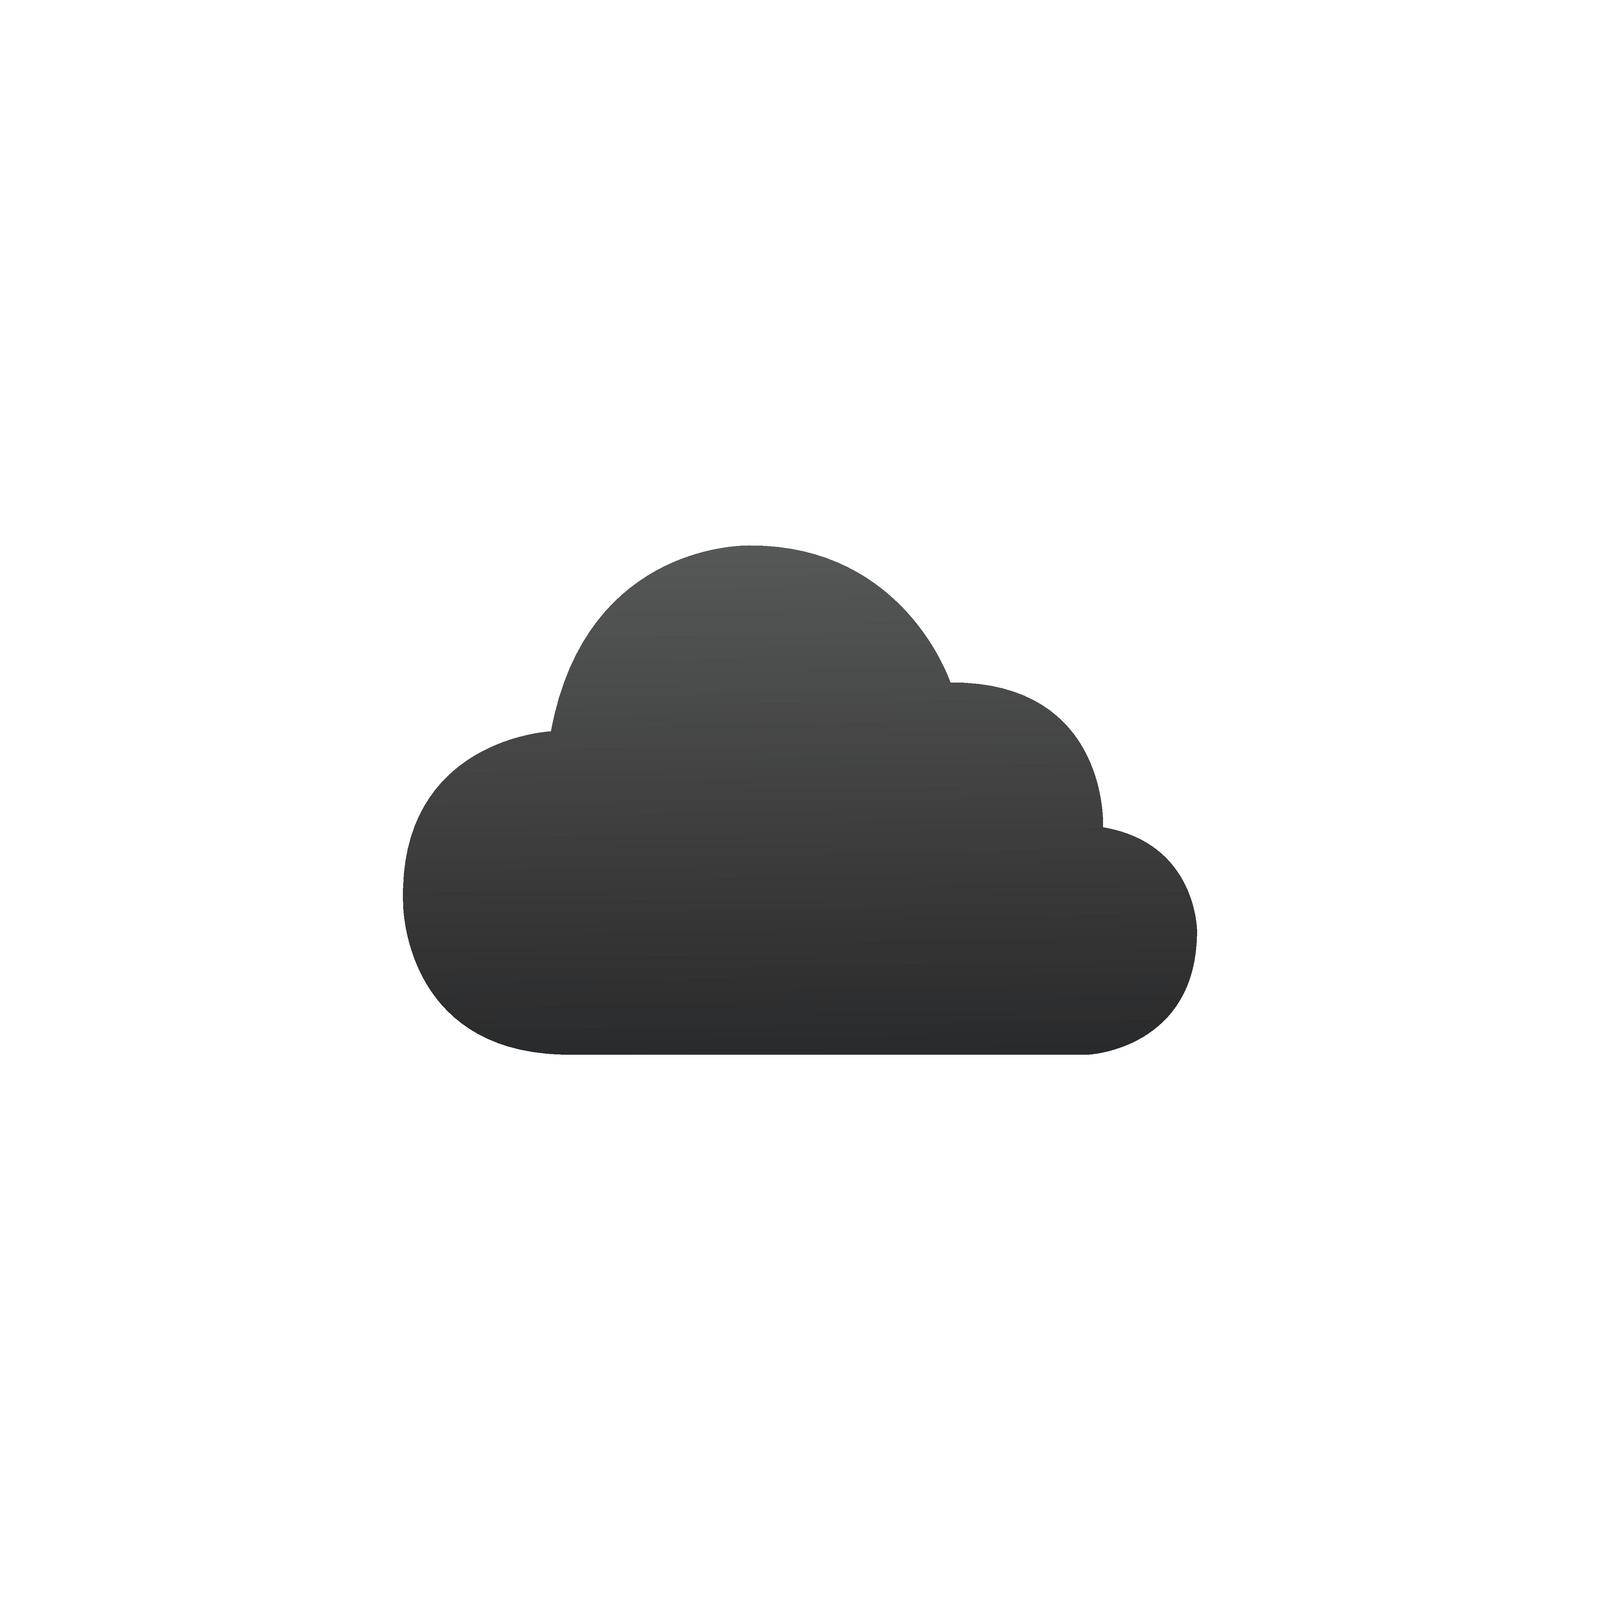 Cloud Icon Vector. Simple flat symbol. Perfect Black pictogram illustration on white